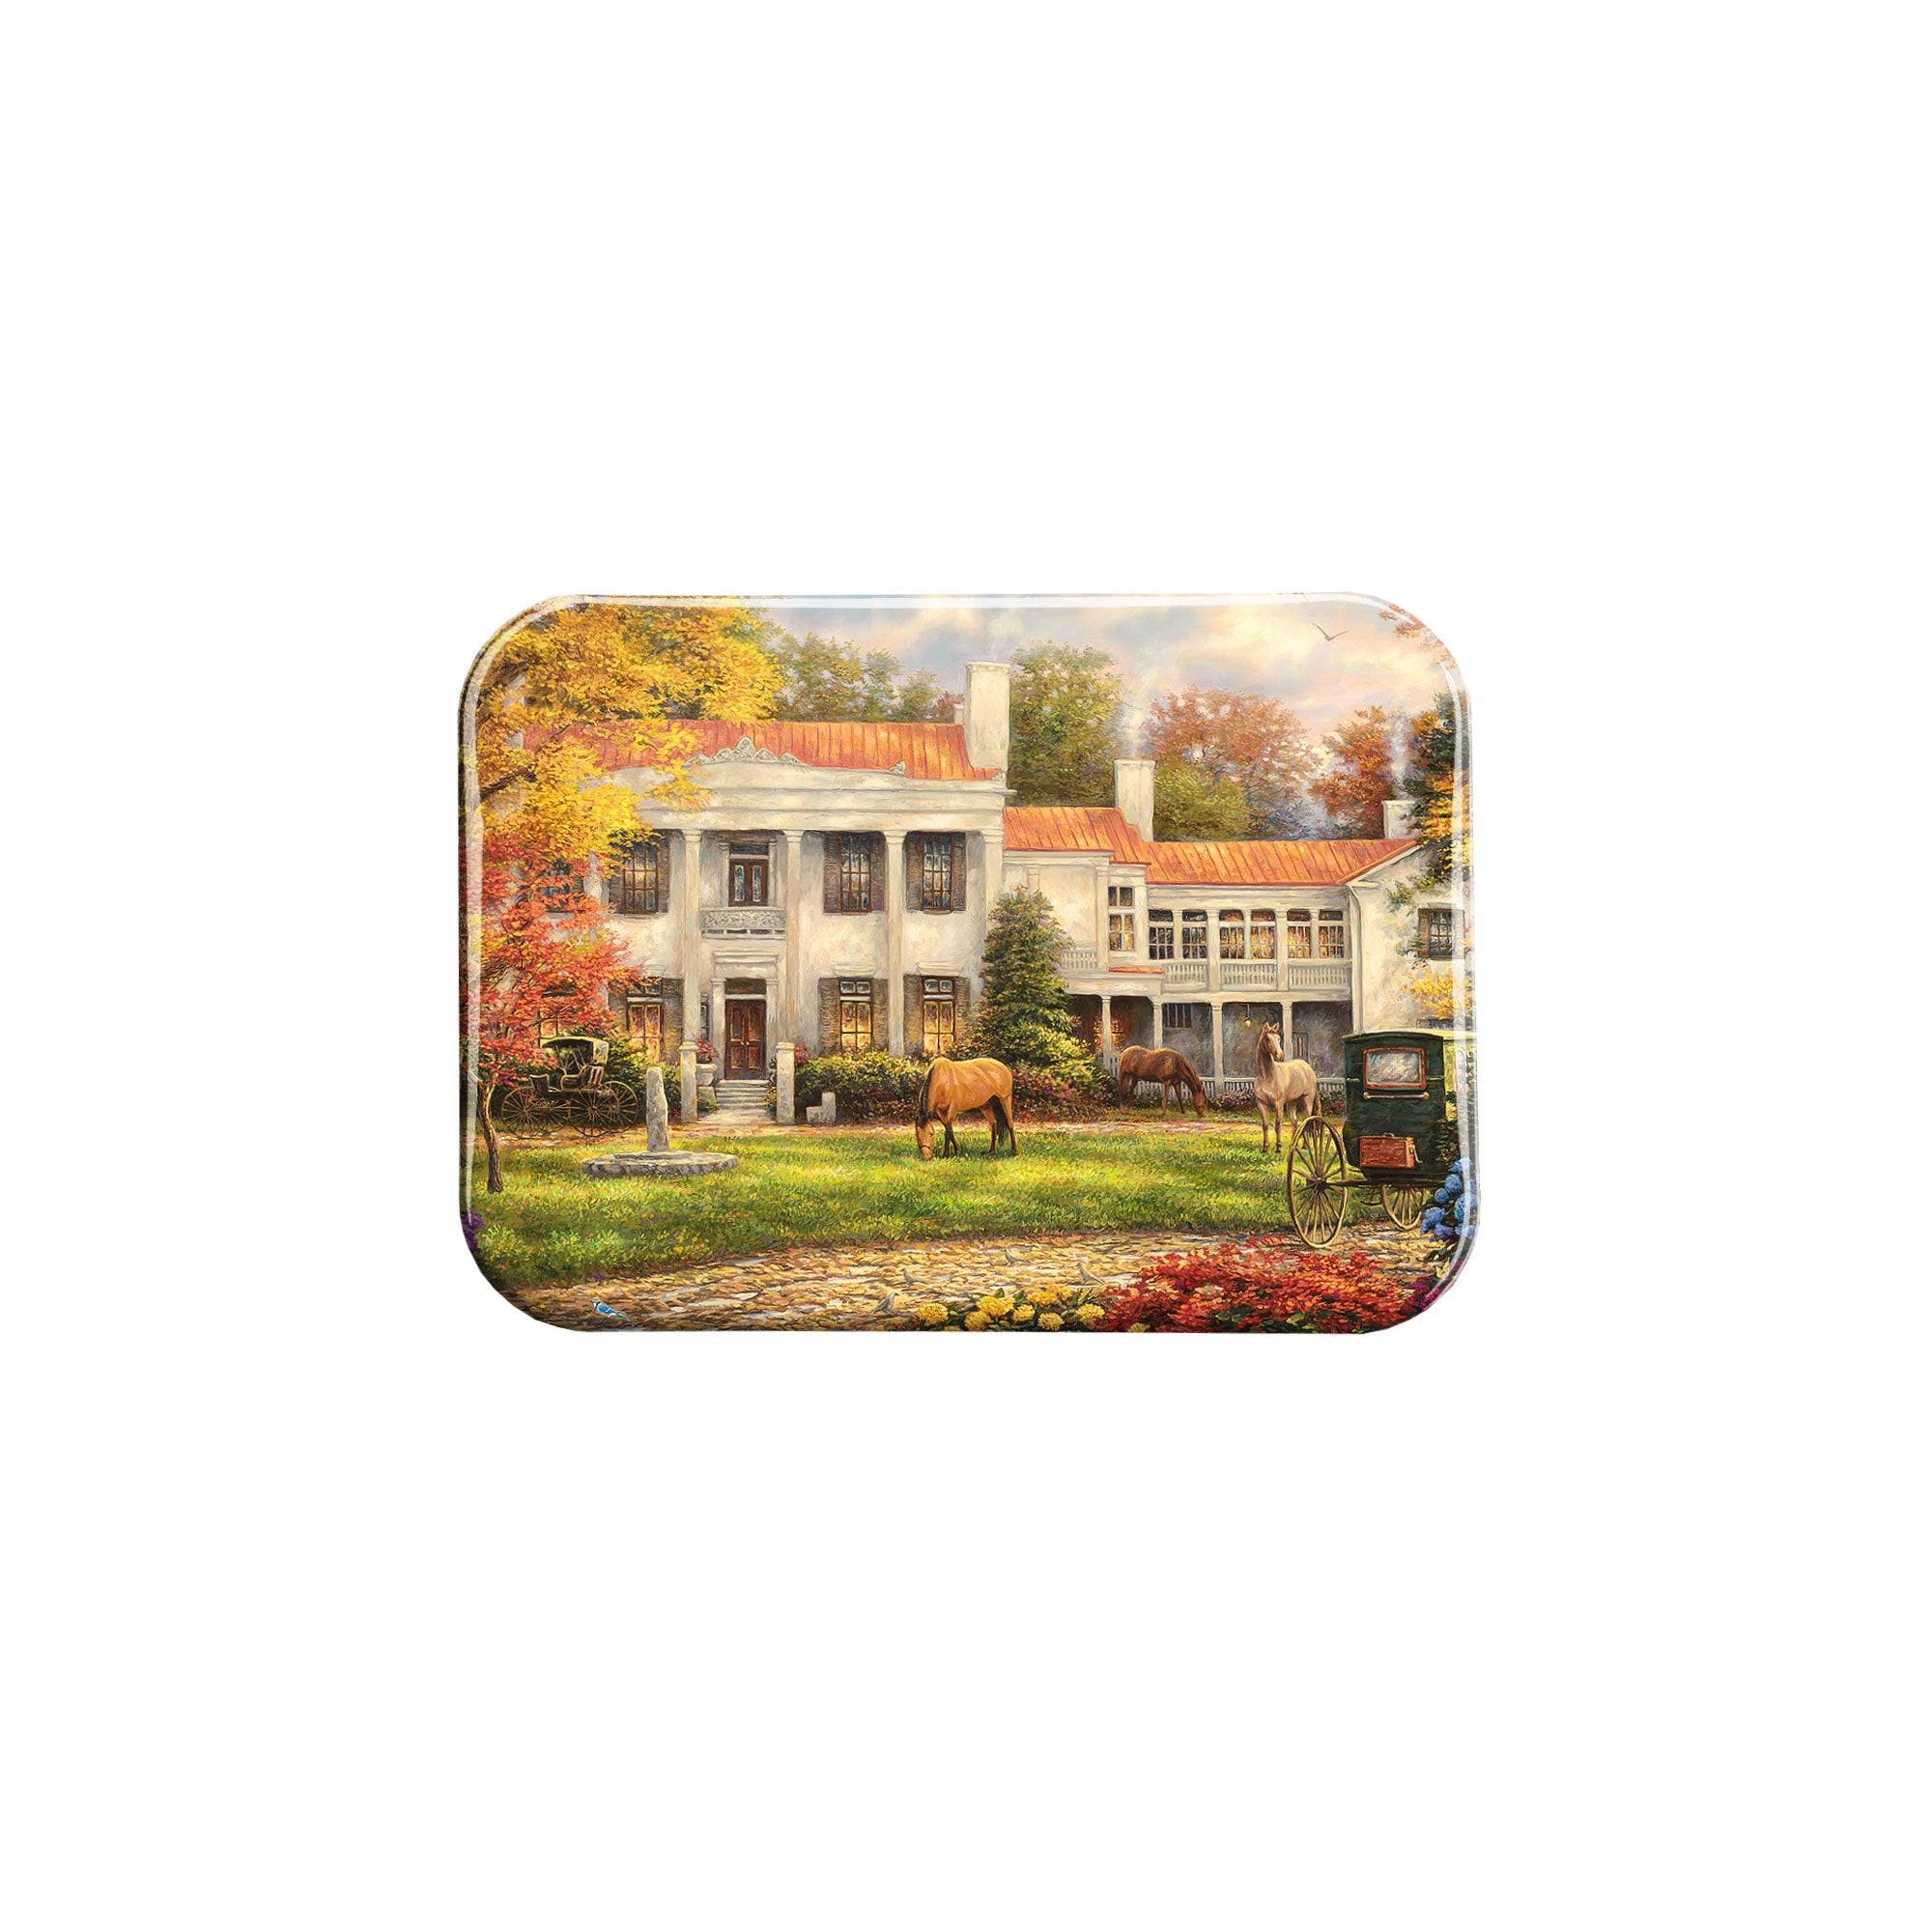 "Autumn Afternoon At Belle Meade" - 2.5" X 3.5" Rectangle Fridge Magnets